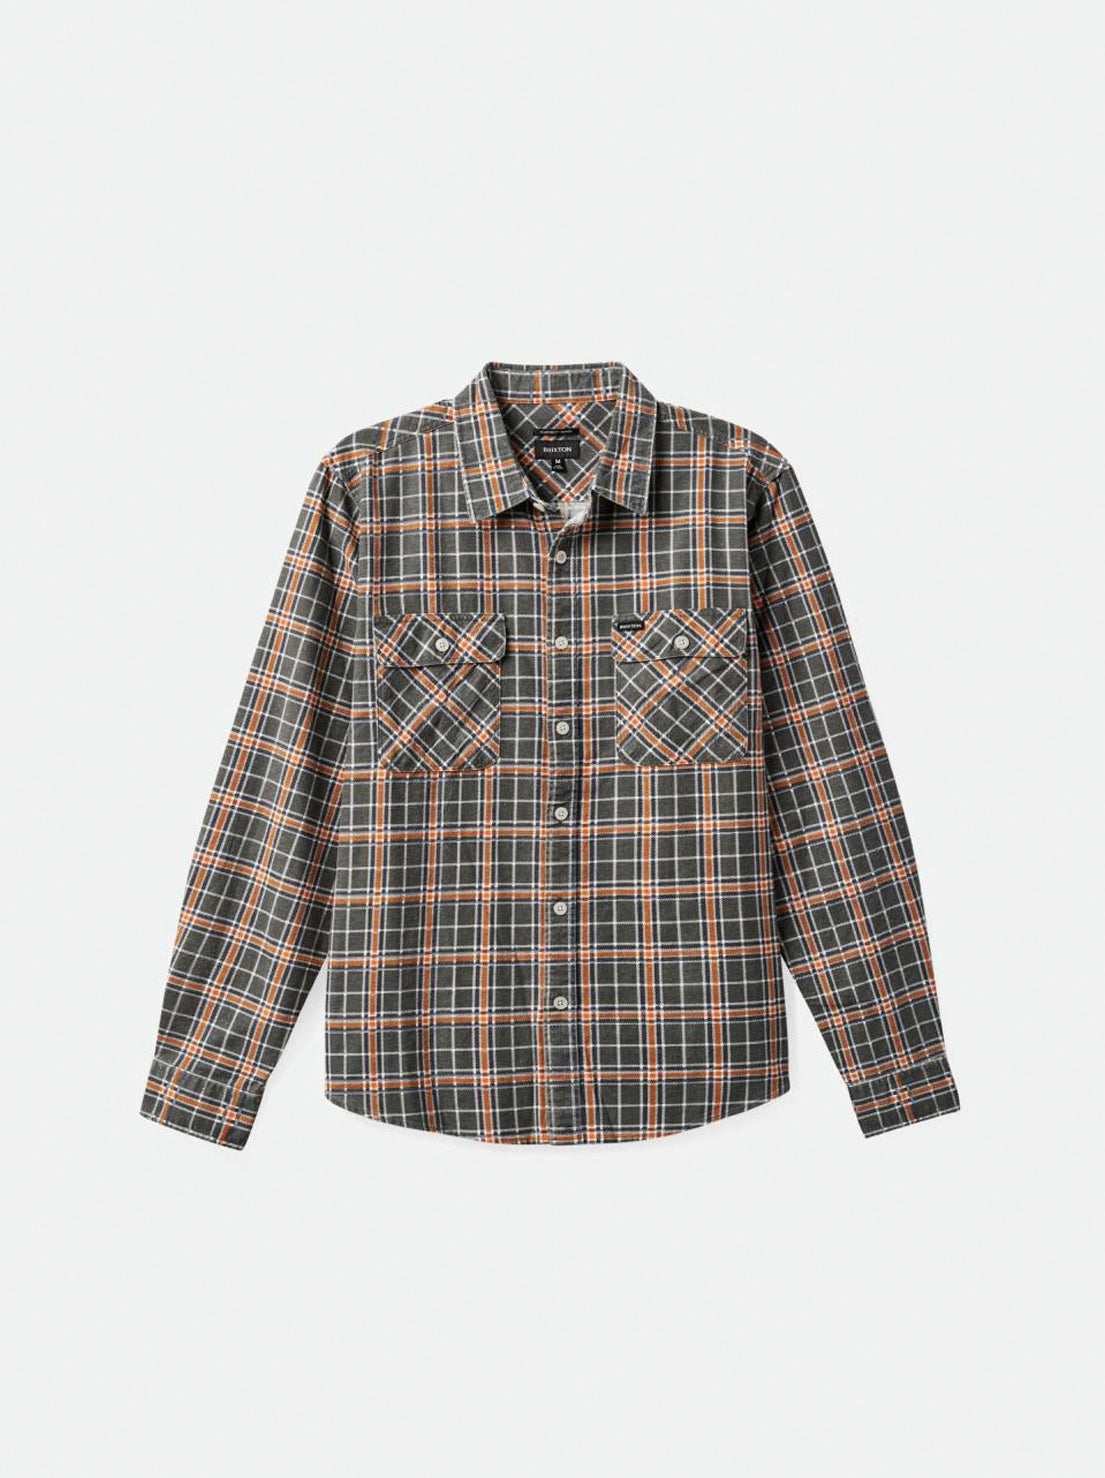 Brixton - Bowery Summer Weight L/S Flannel - Charcoal / Burnt Orange / Off White